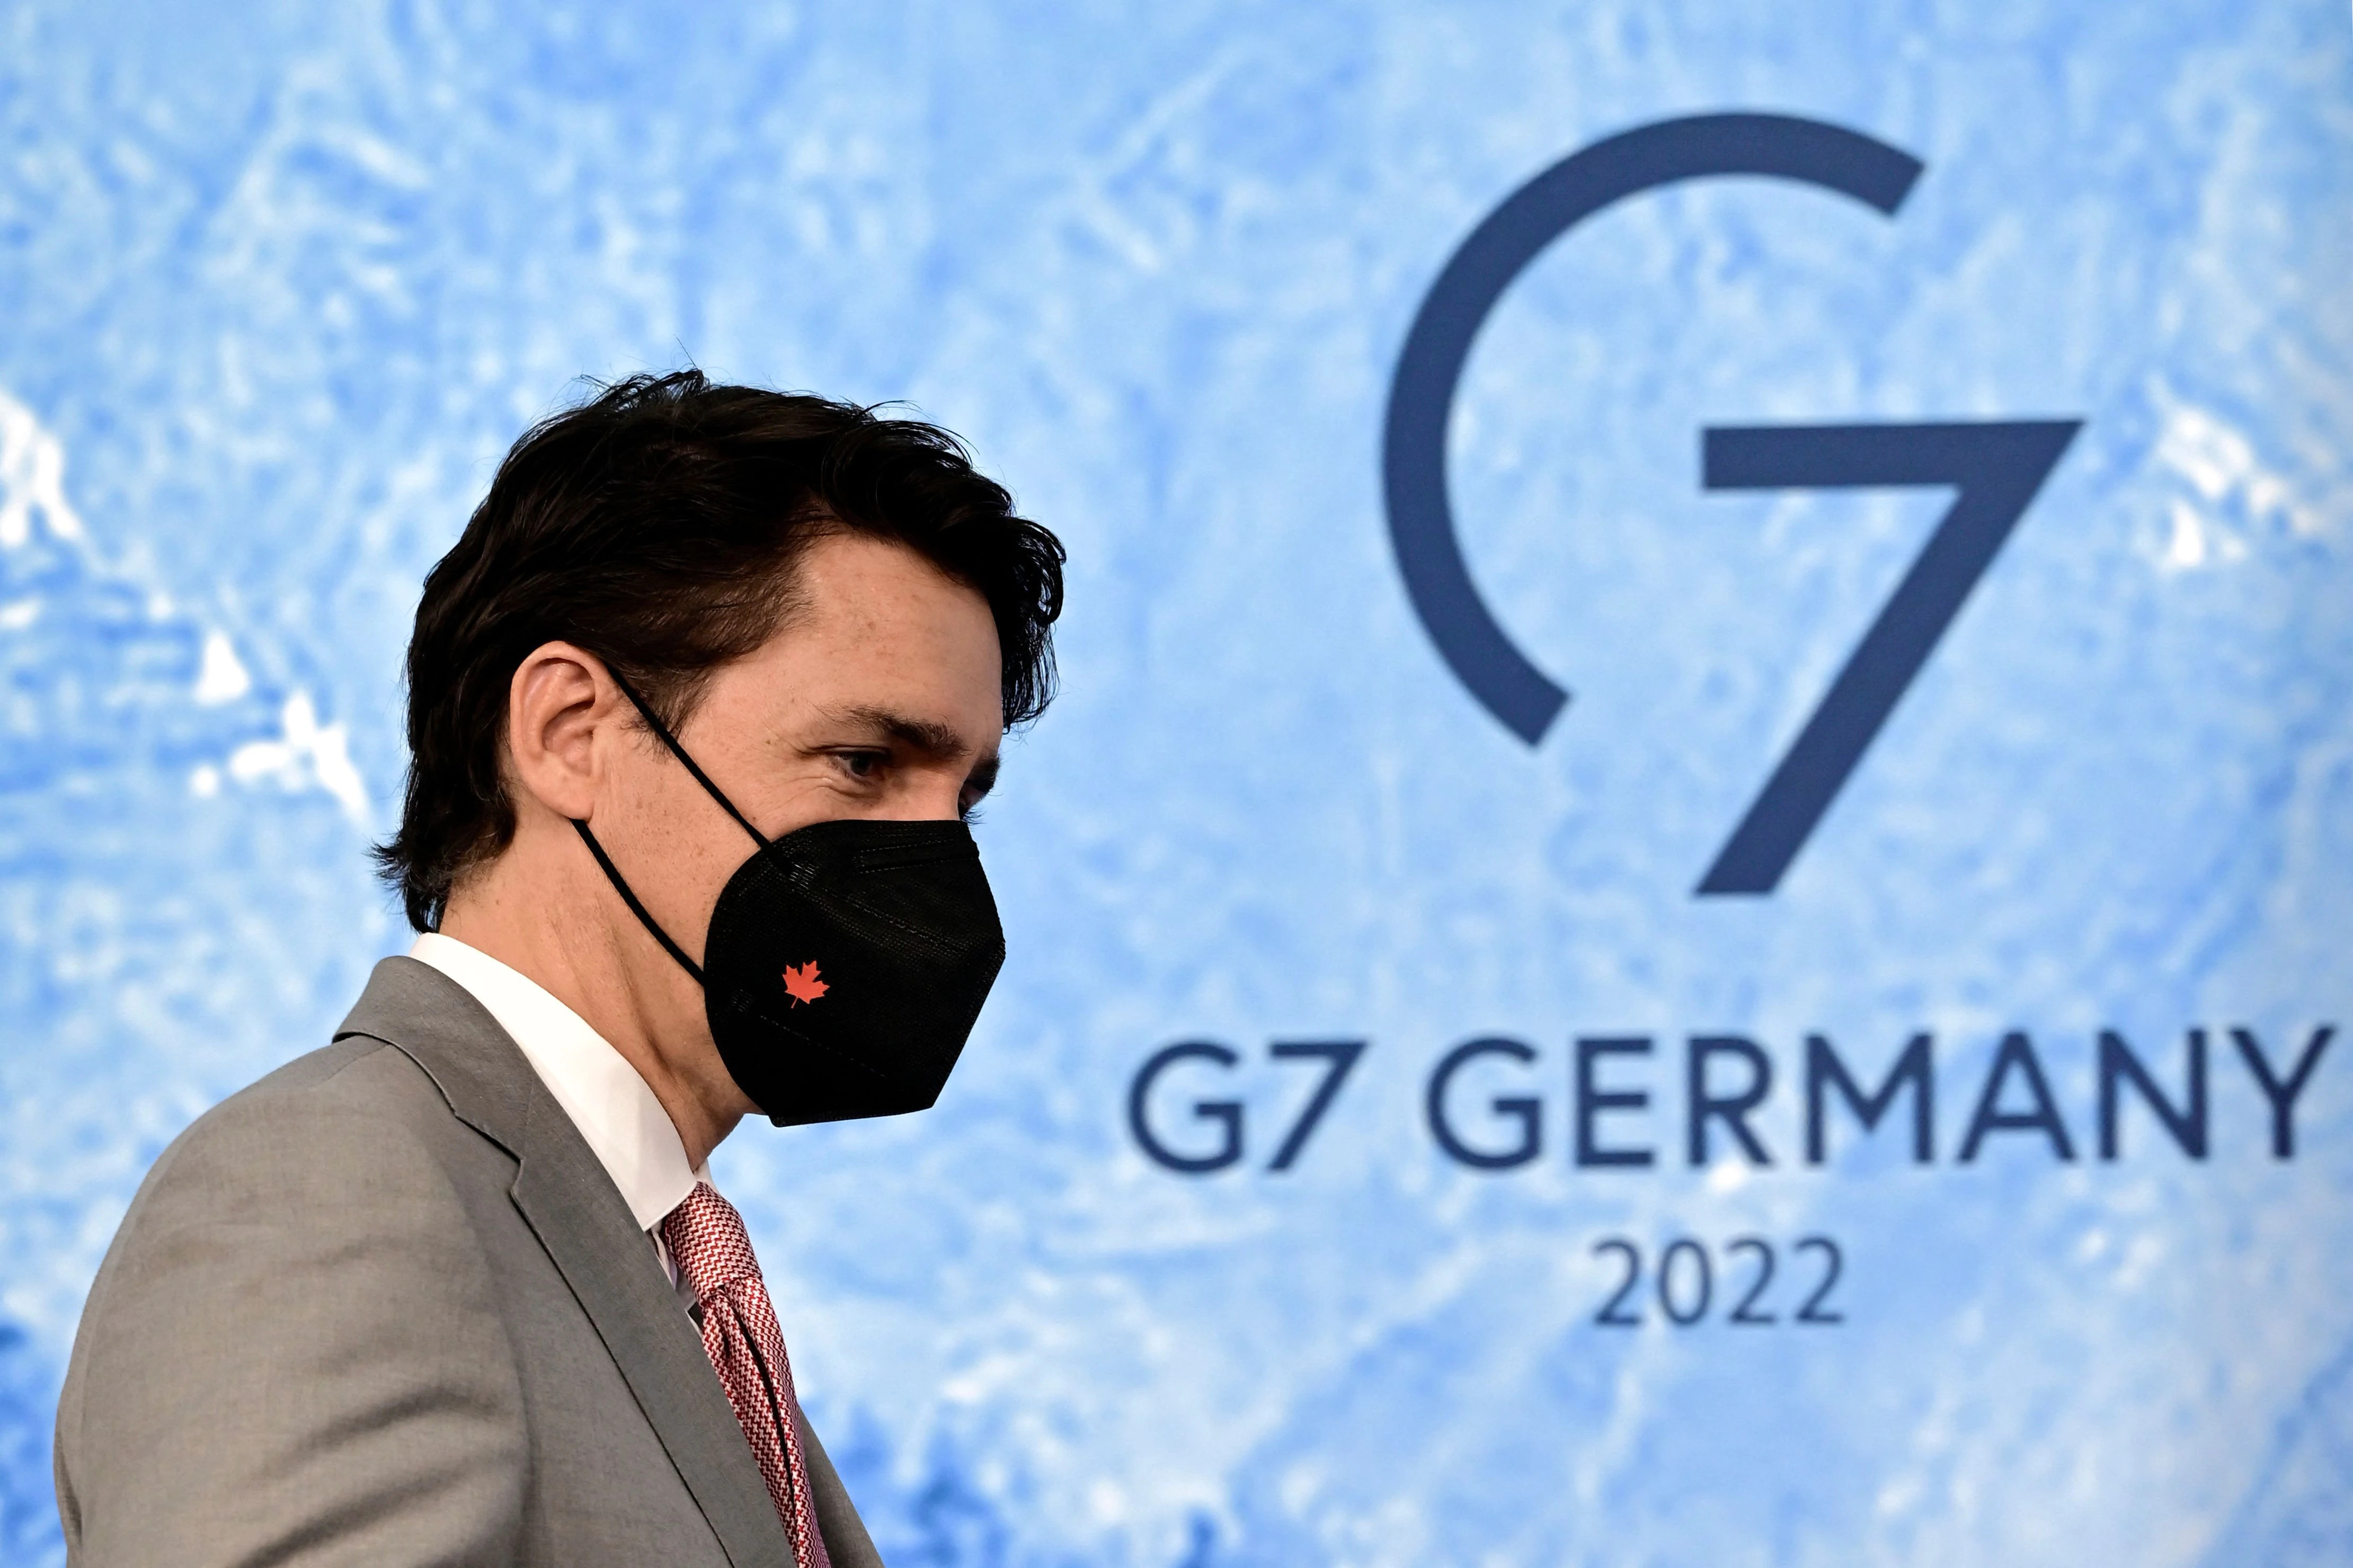 Canadian PM Justin Trudeau affirmed that he and all the other G7 leaders will attend the G20 summit in November even if Russian President Vladimir Putin is there.